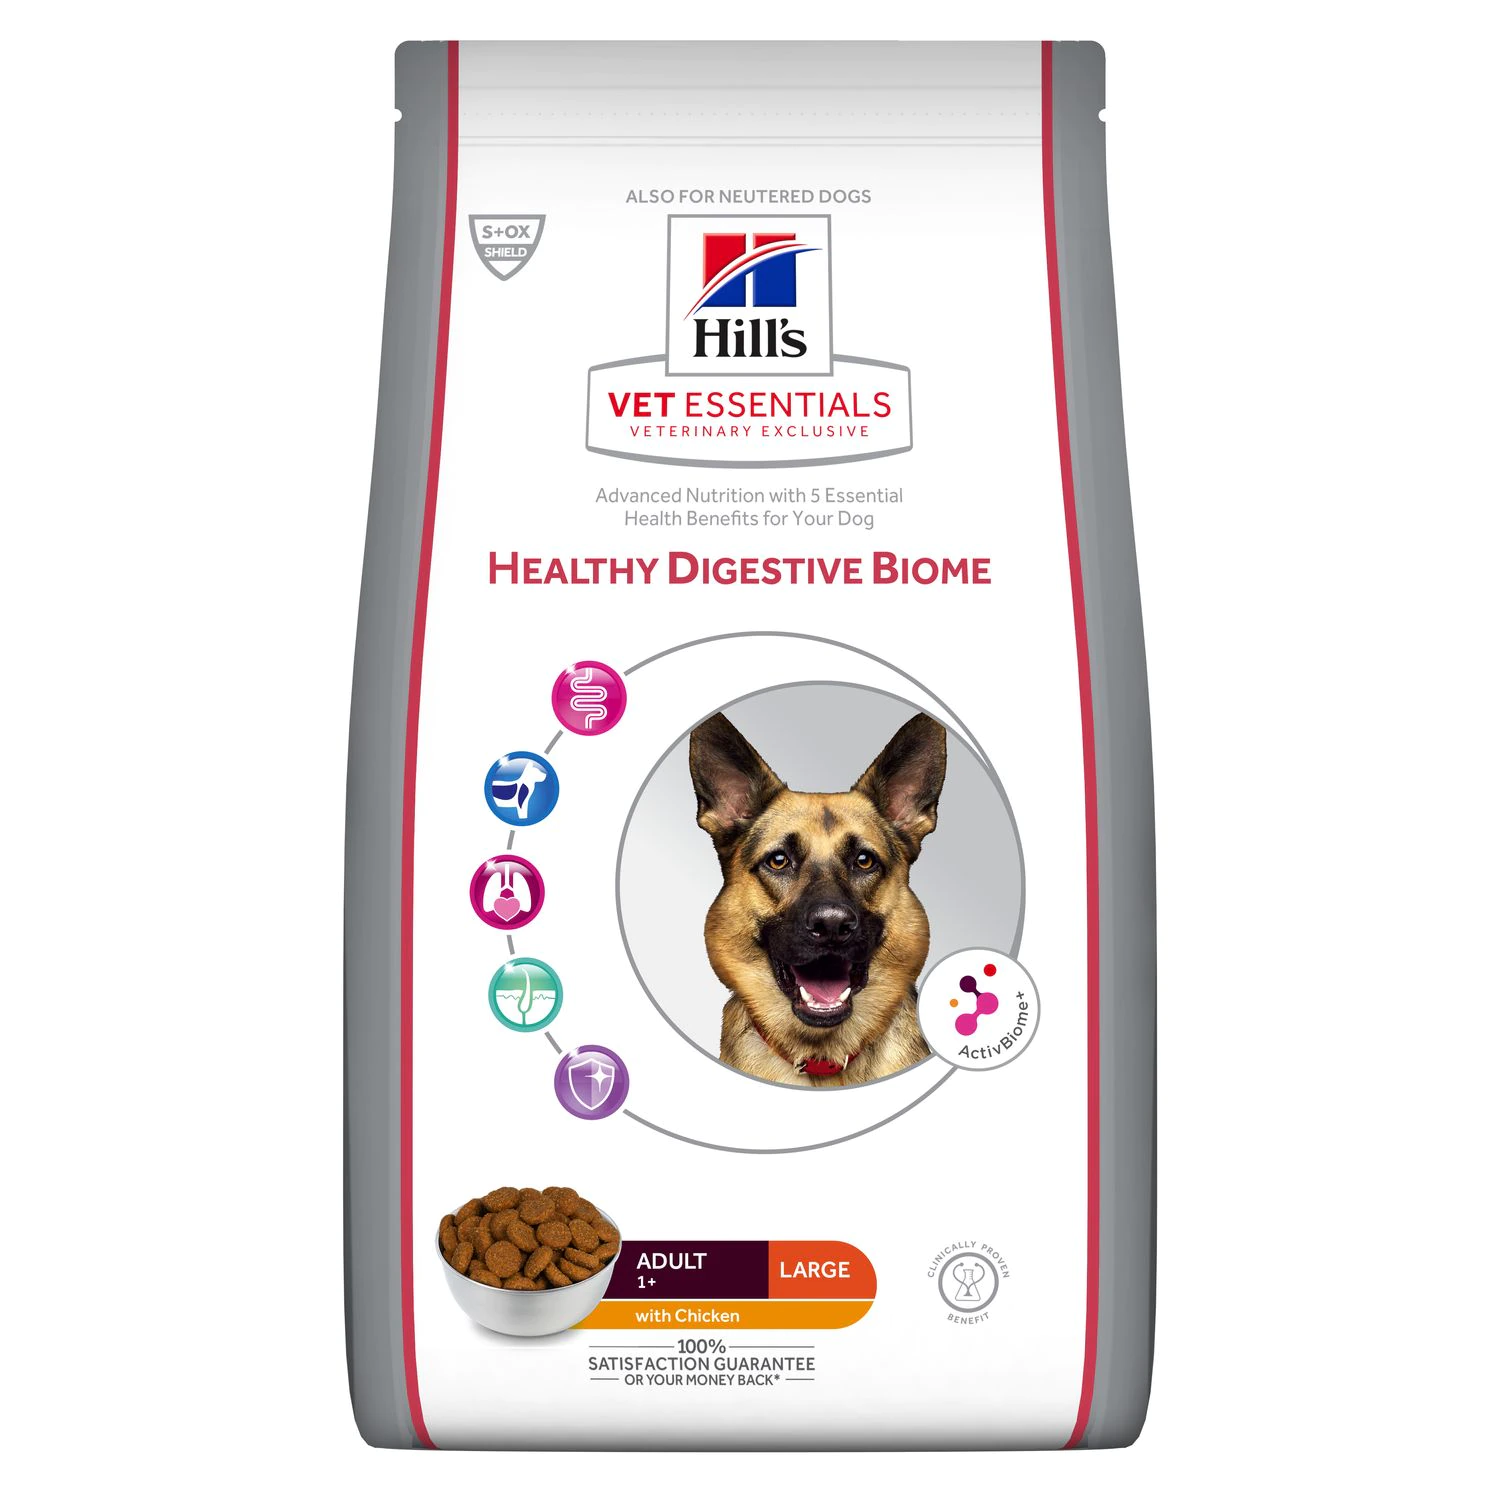 Hill's Vet Essentials Healthy Digestive Biome Adult Large Hond - 10kg